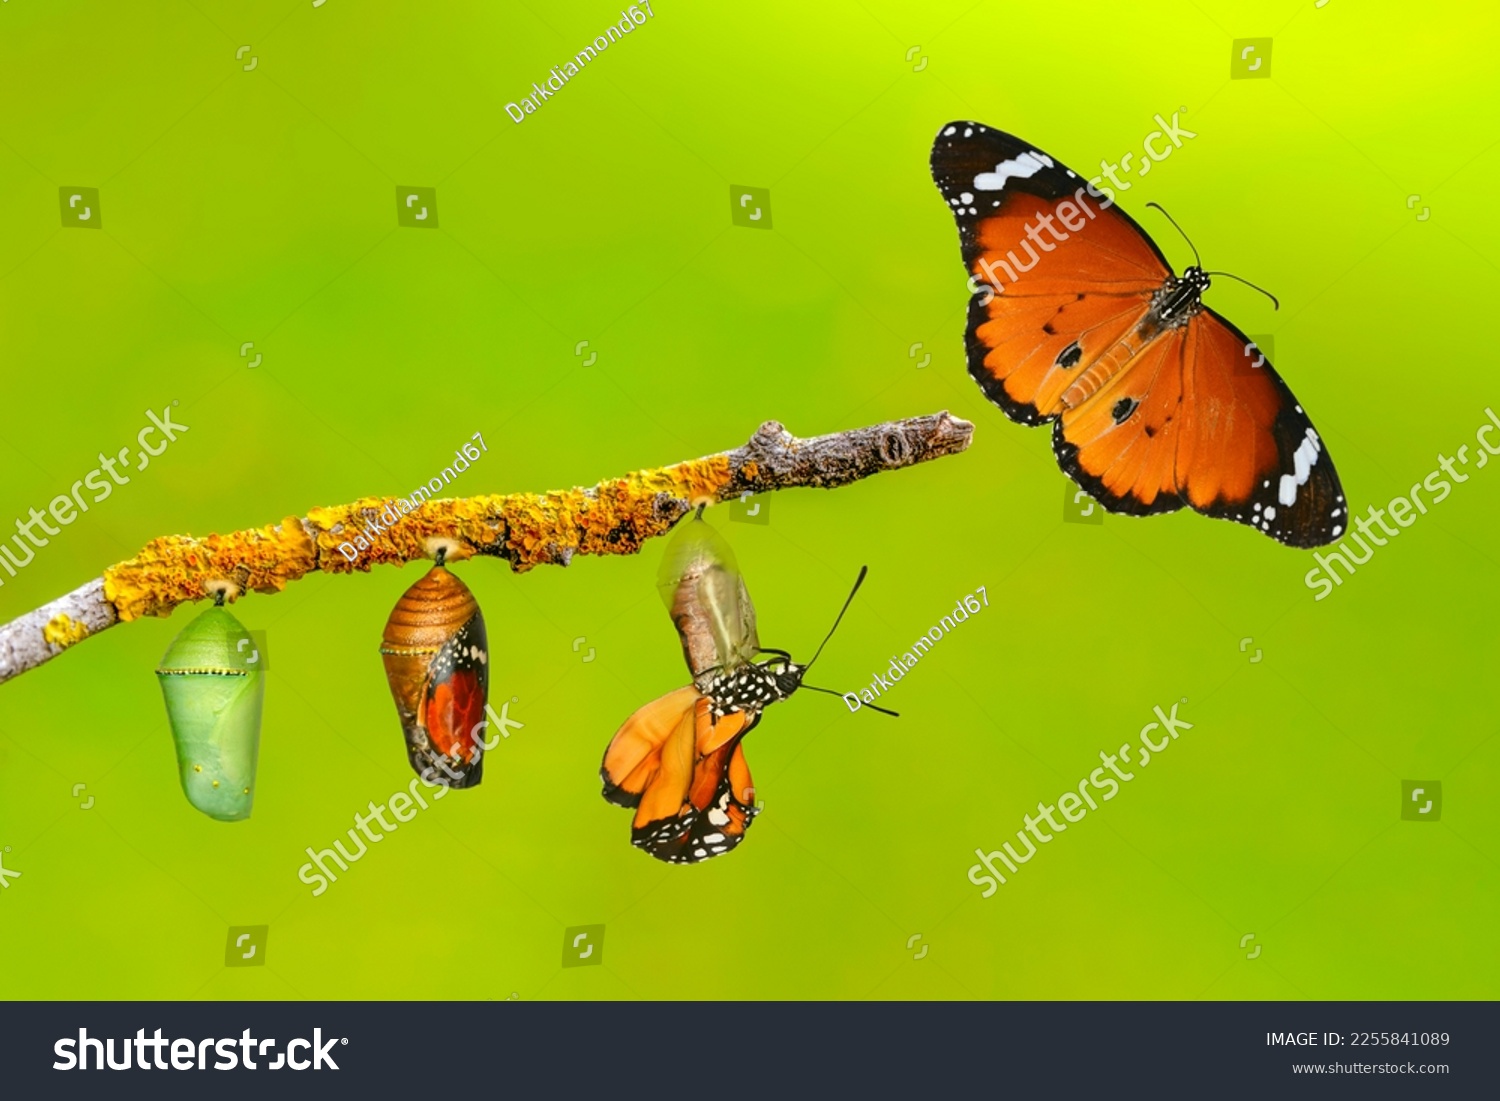 Amazing moment . caterpillar, Large tropical butterfly hatch from the pupa, and emerging with clipping path. Concept transformation of Butterfly #2255841089